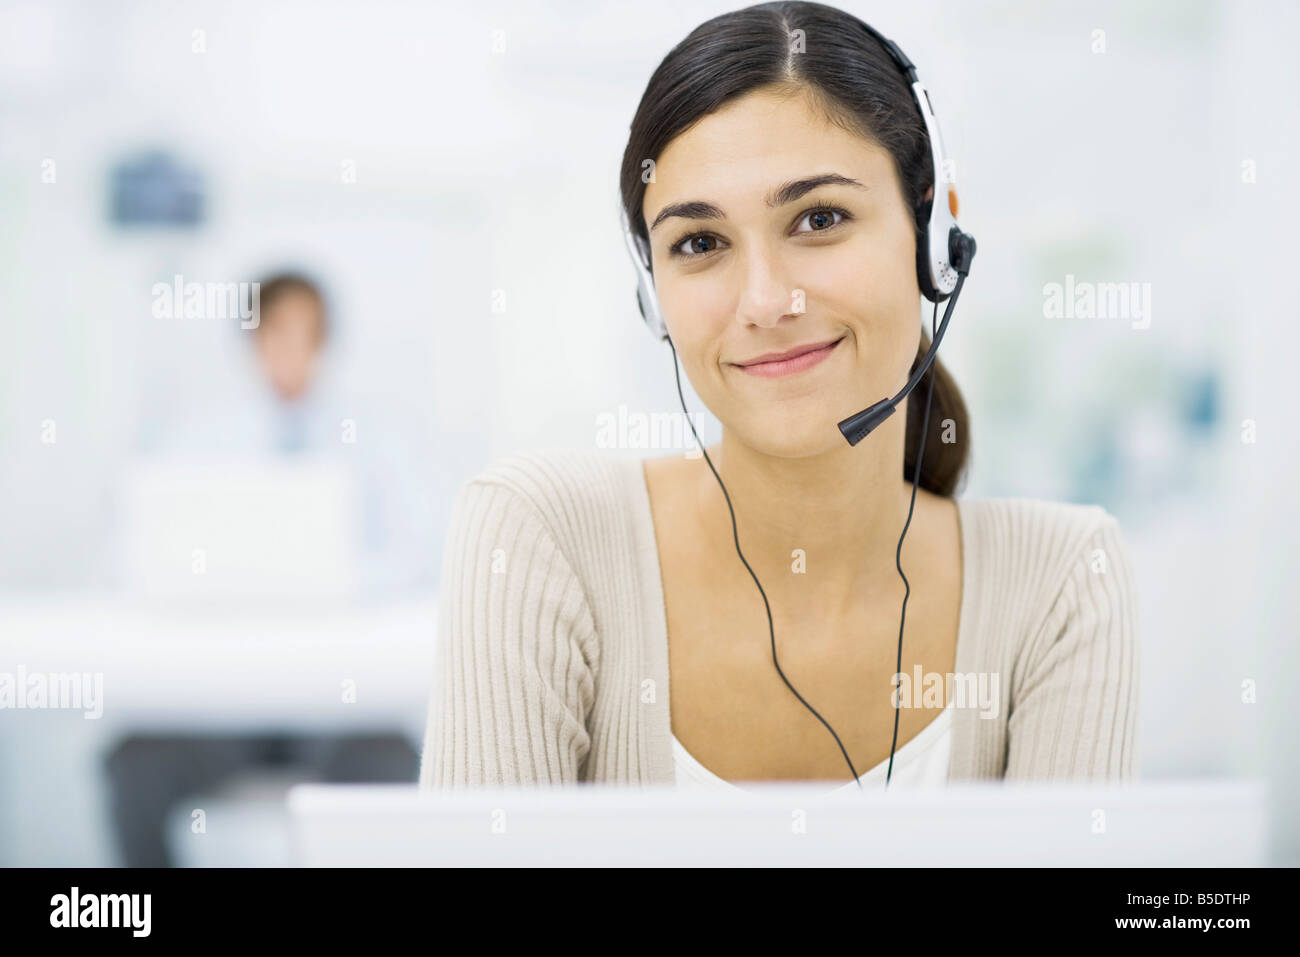 Young female telemarketer Stock Photo